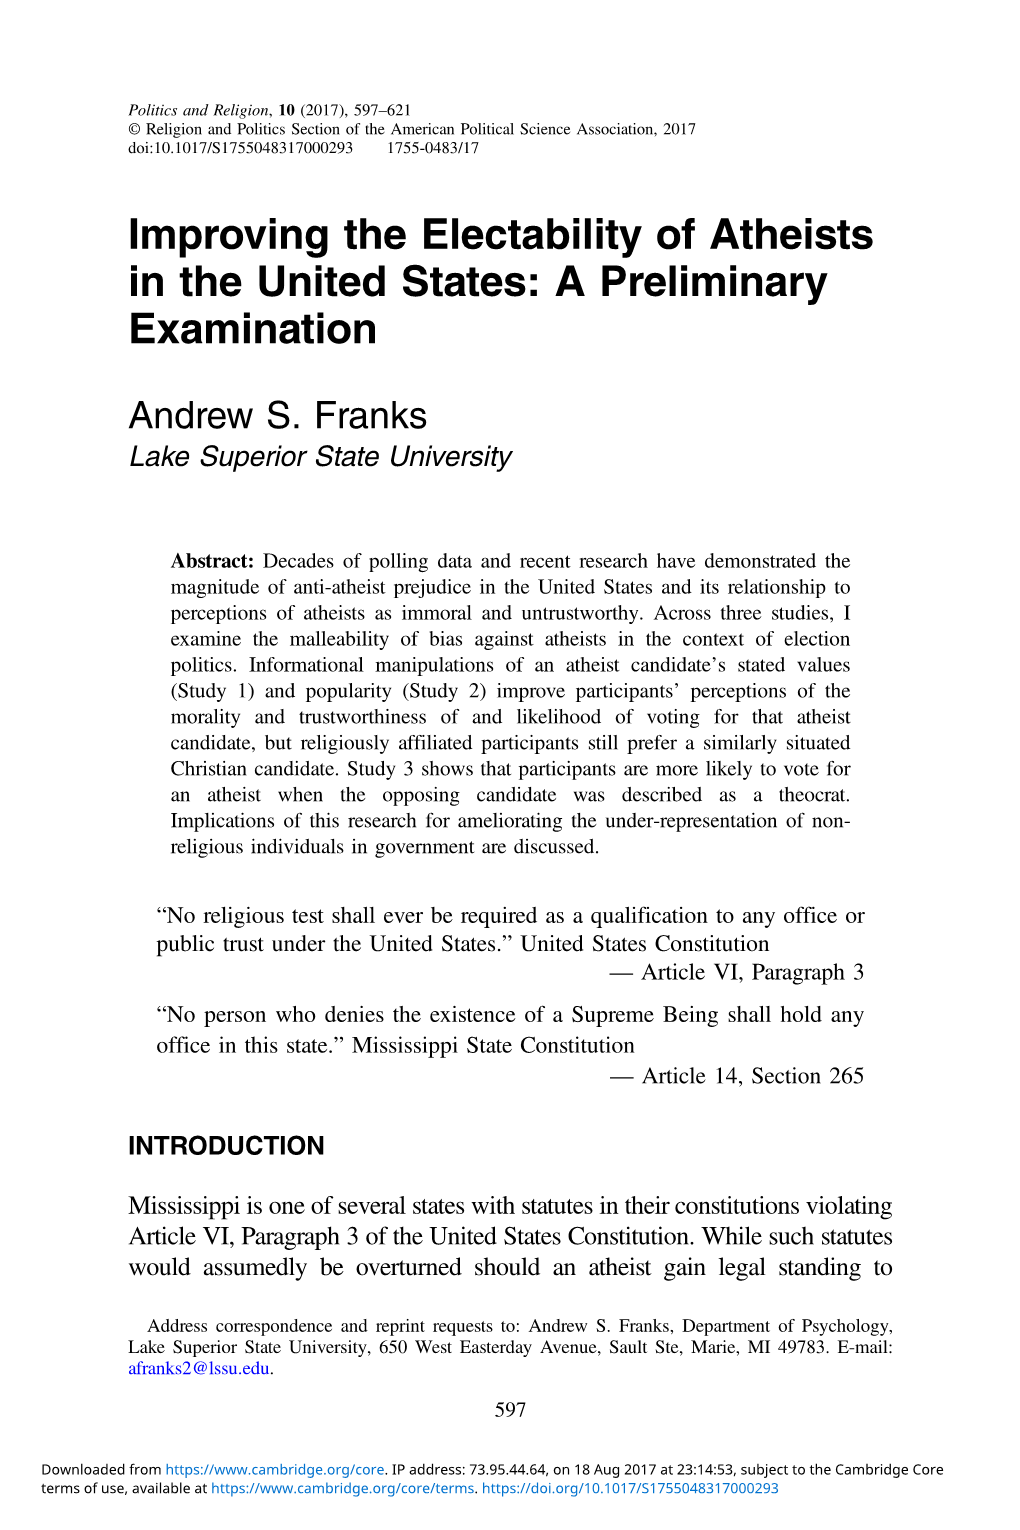 Improving the Electability of Atheists in the United States: a Preliminary Examination